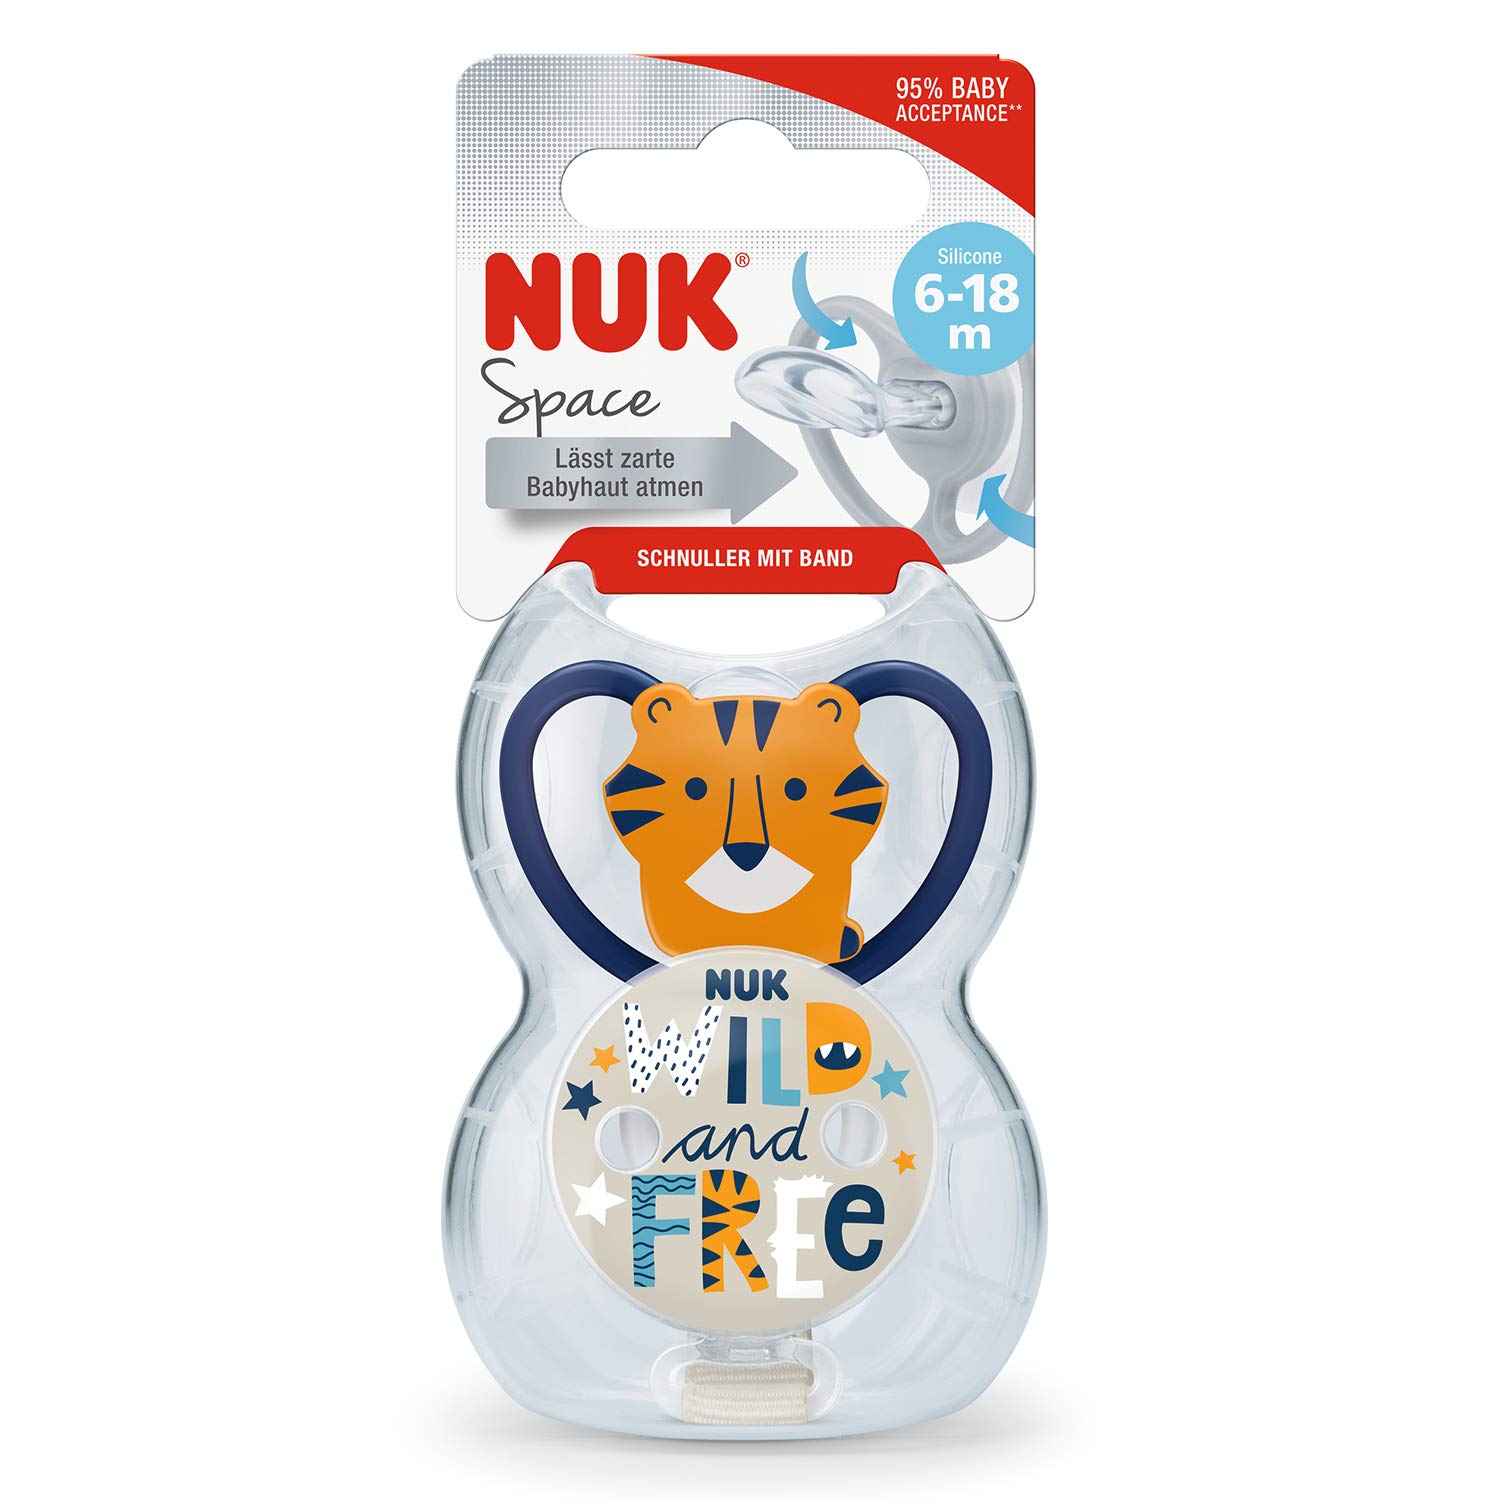 NUK 10176234 Space Set 1x Space Dummy Holder Orthodontic Shape for 6-18 Months Tiger Blue